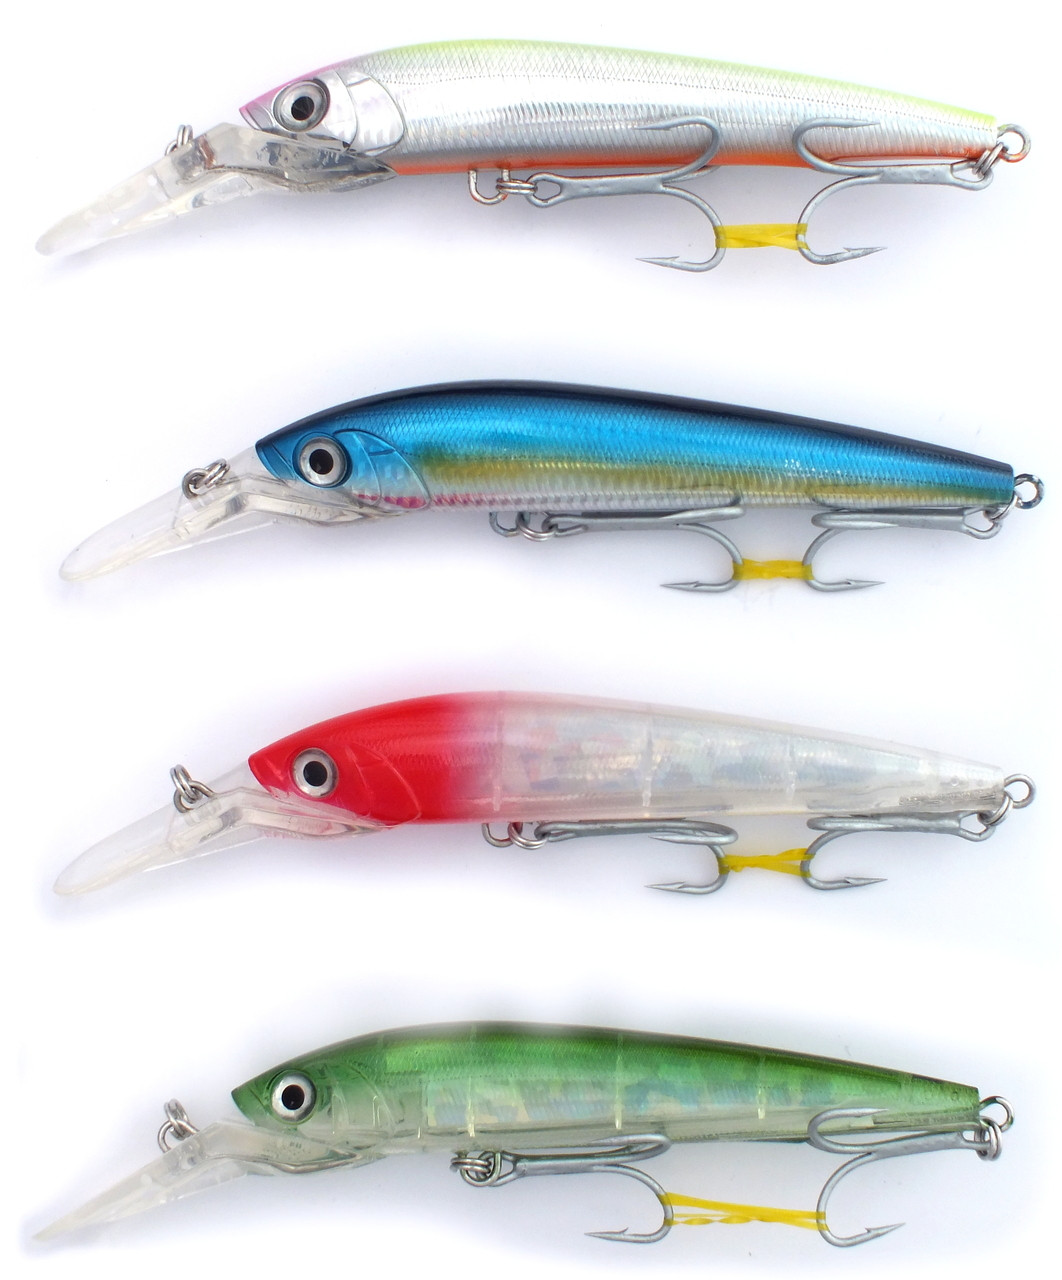 https://cdn10.bigcommerce.com/s-ruolvs/products/229/images/1981/Bear_King_Minnow_180mm_X_4_no_package_B_40__42685.1605260124.1280.1280.jpg?c=2